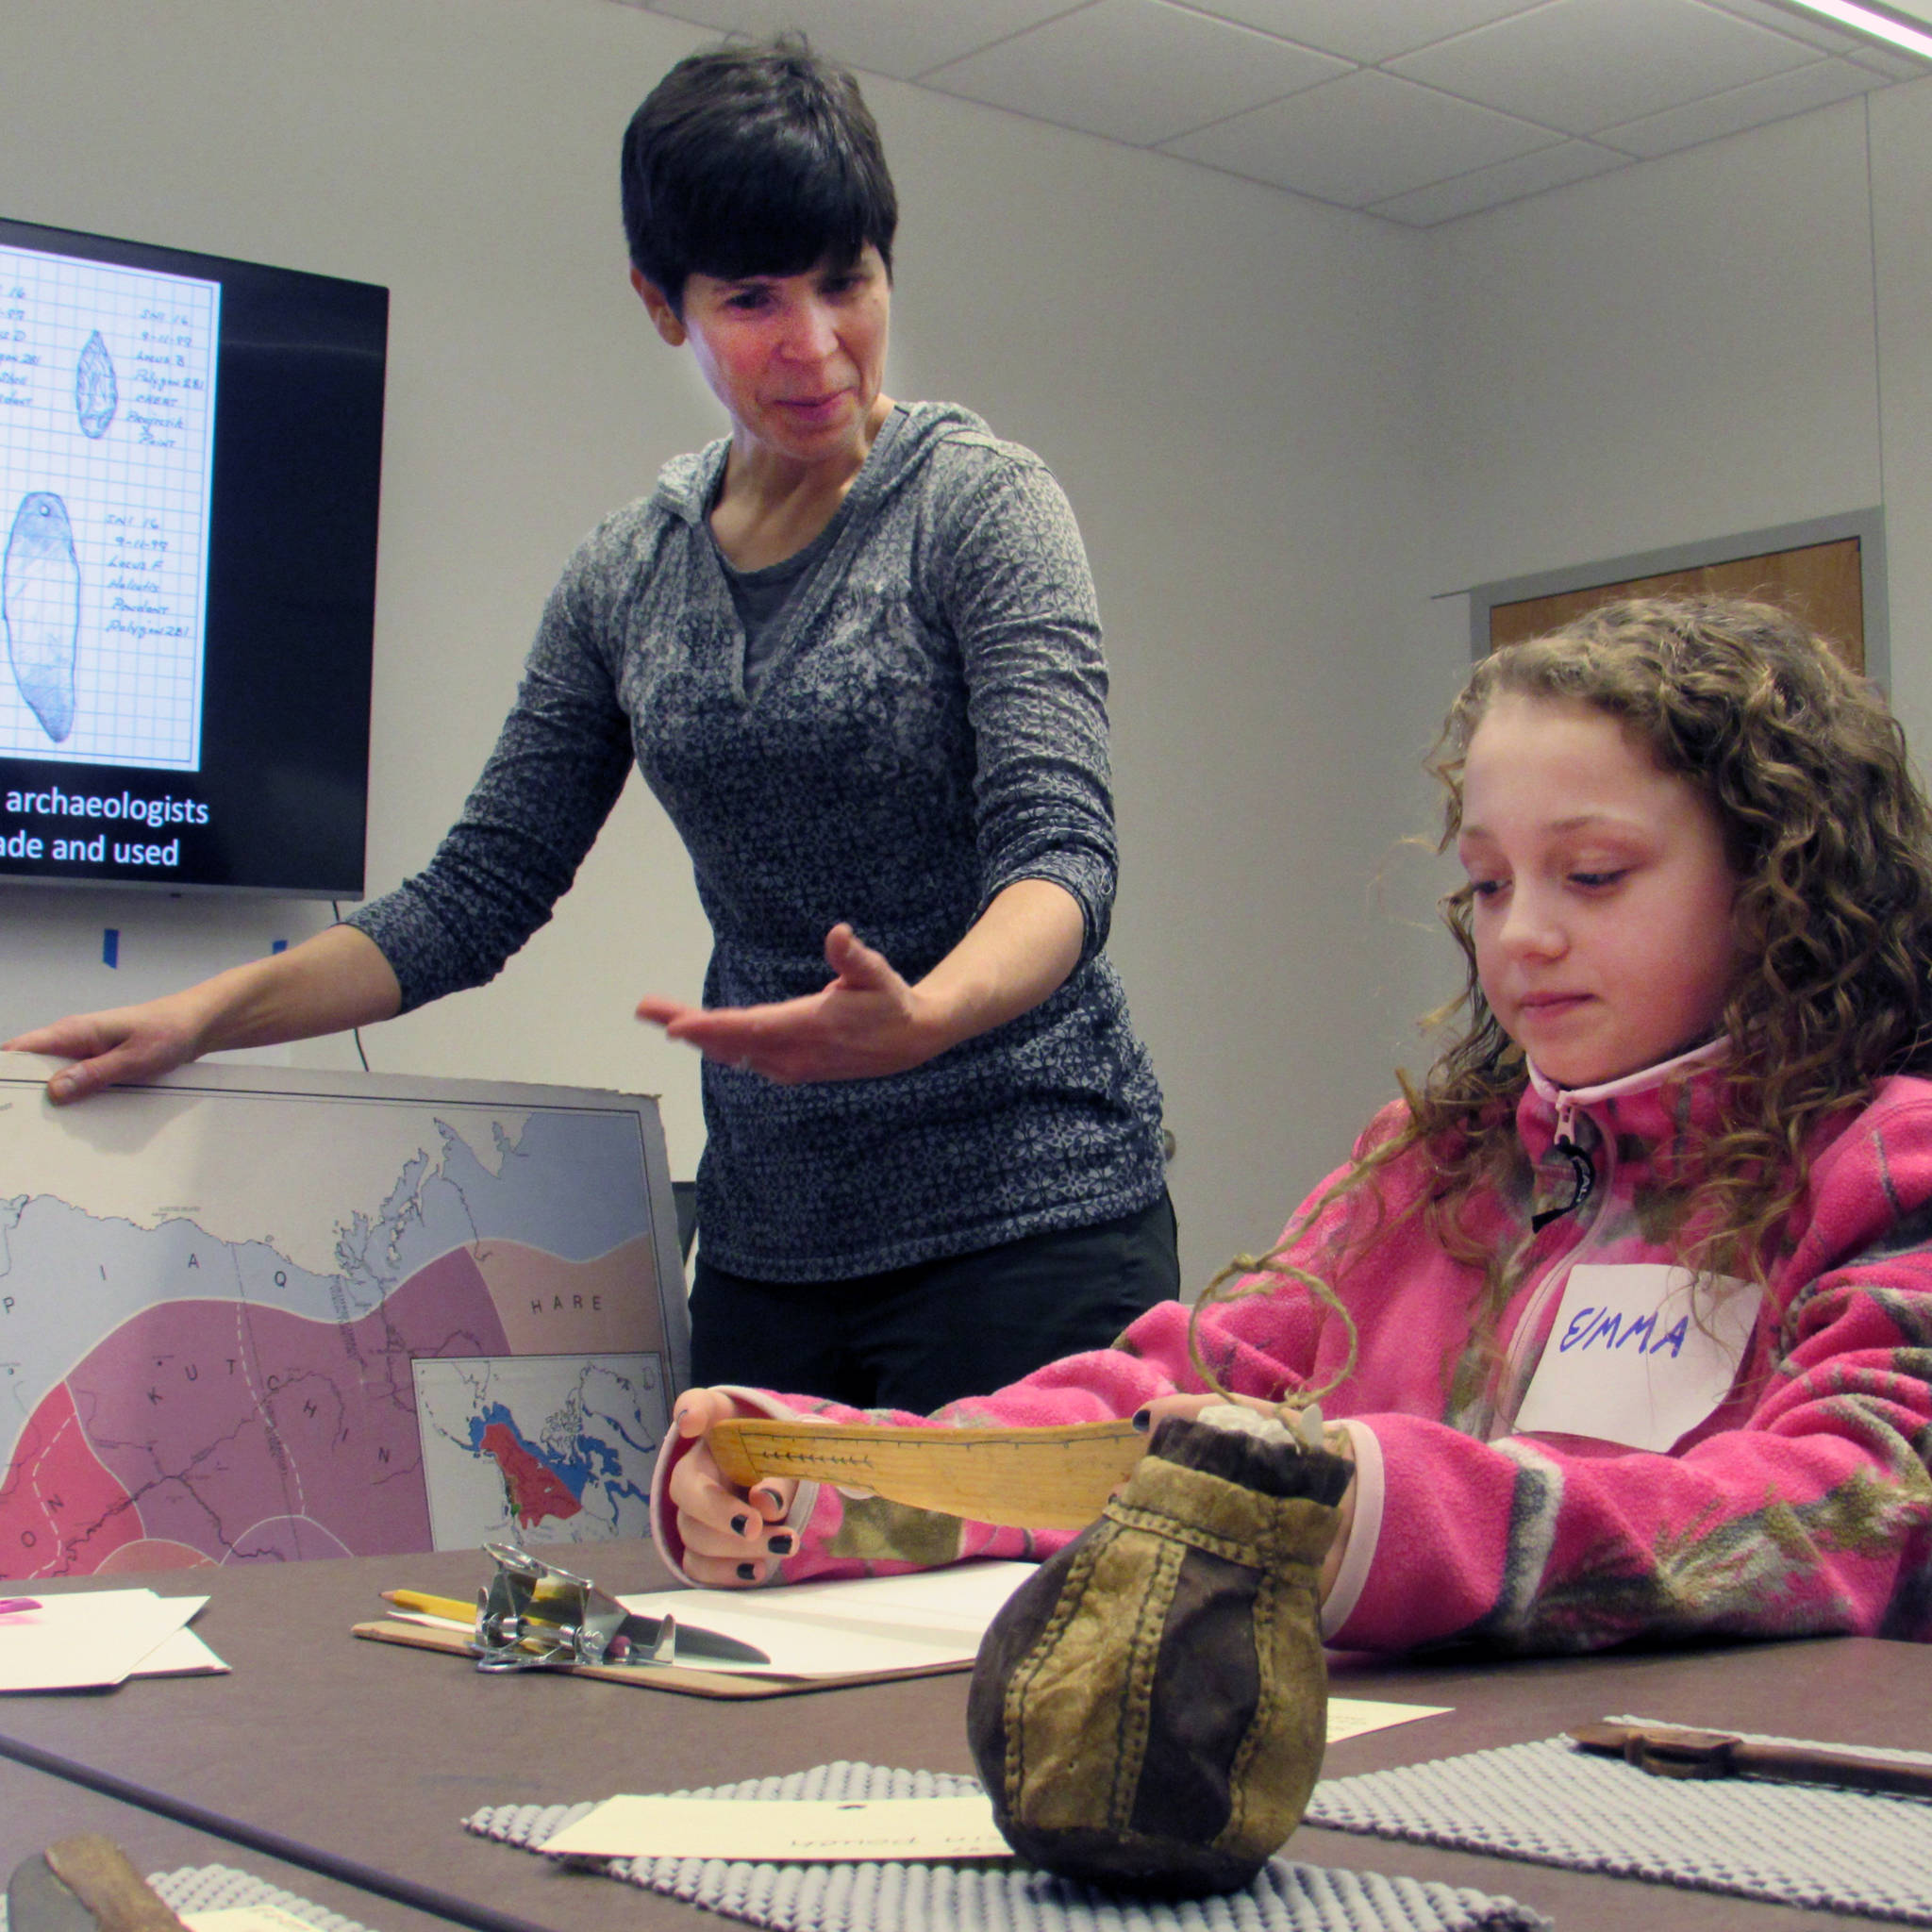 Science illustrator Kathy Hocker talks to Emma Dorsey, 10, who contemplates an artifact that she might sketch. (Ben Hohenstatt Capital City Weekly)